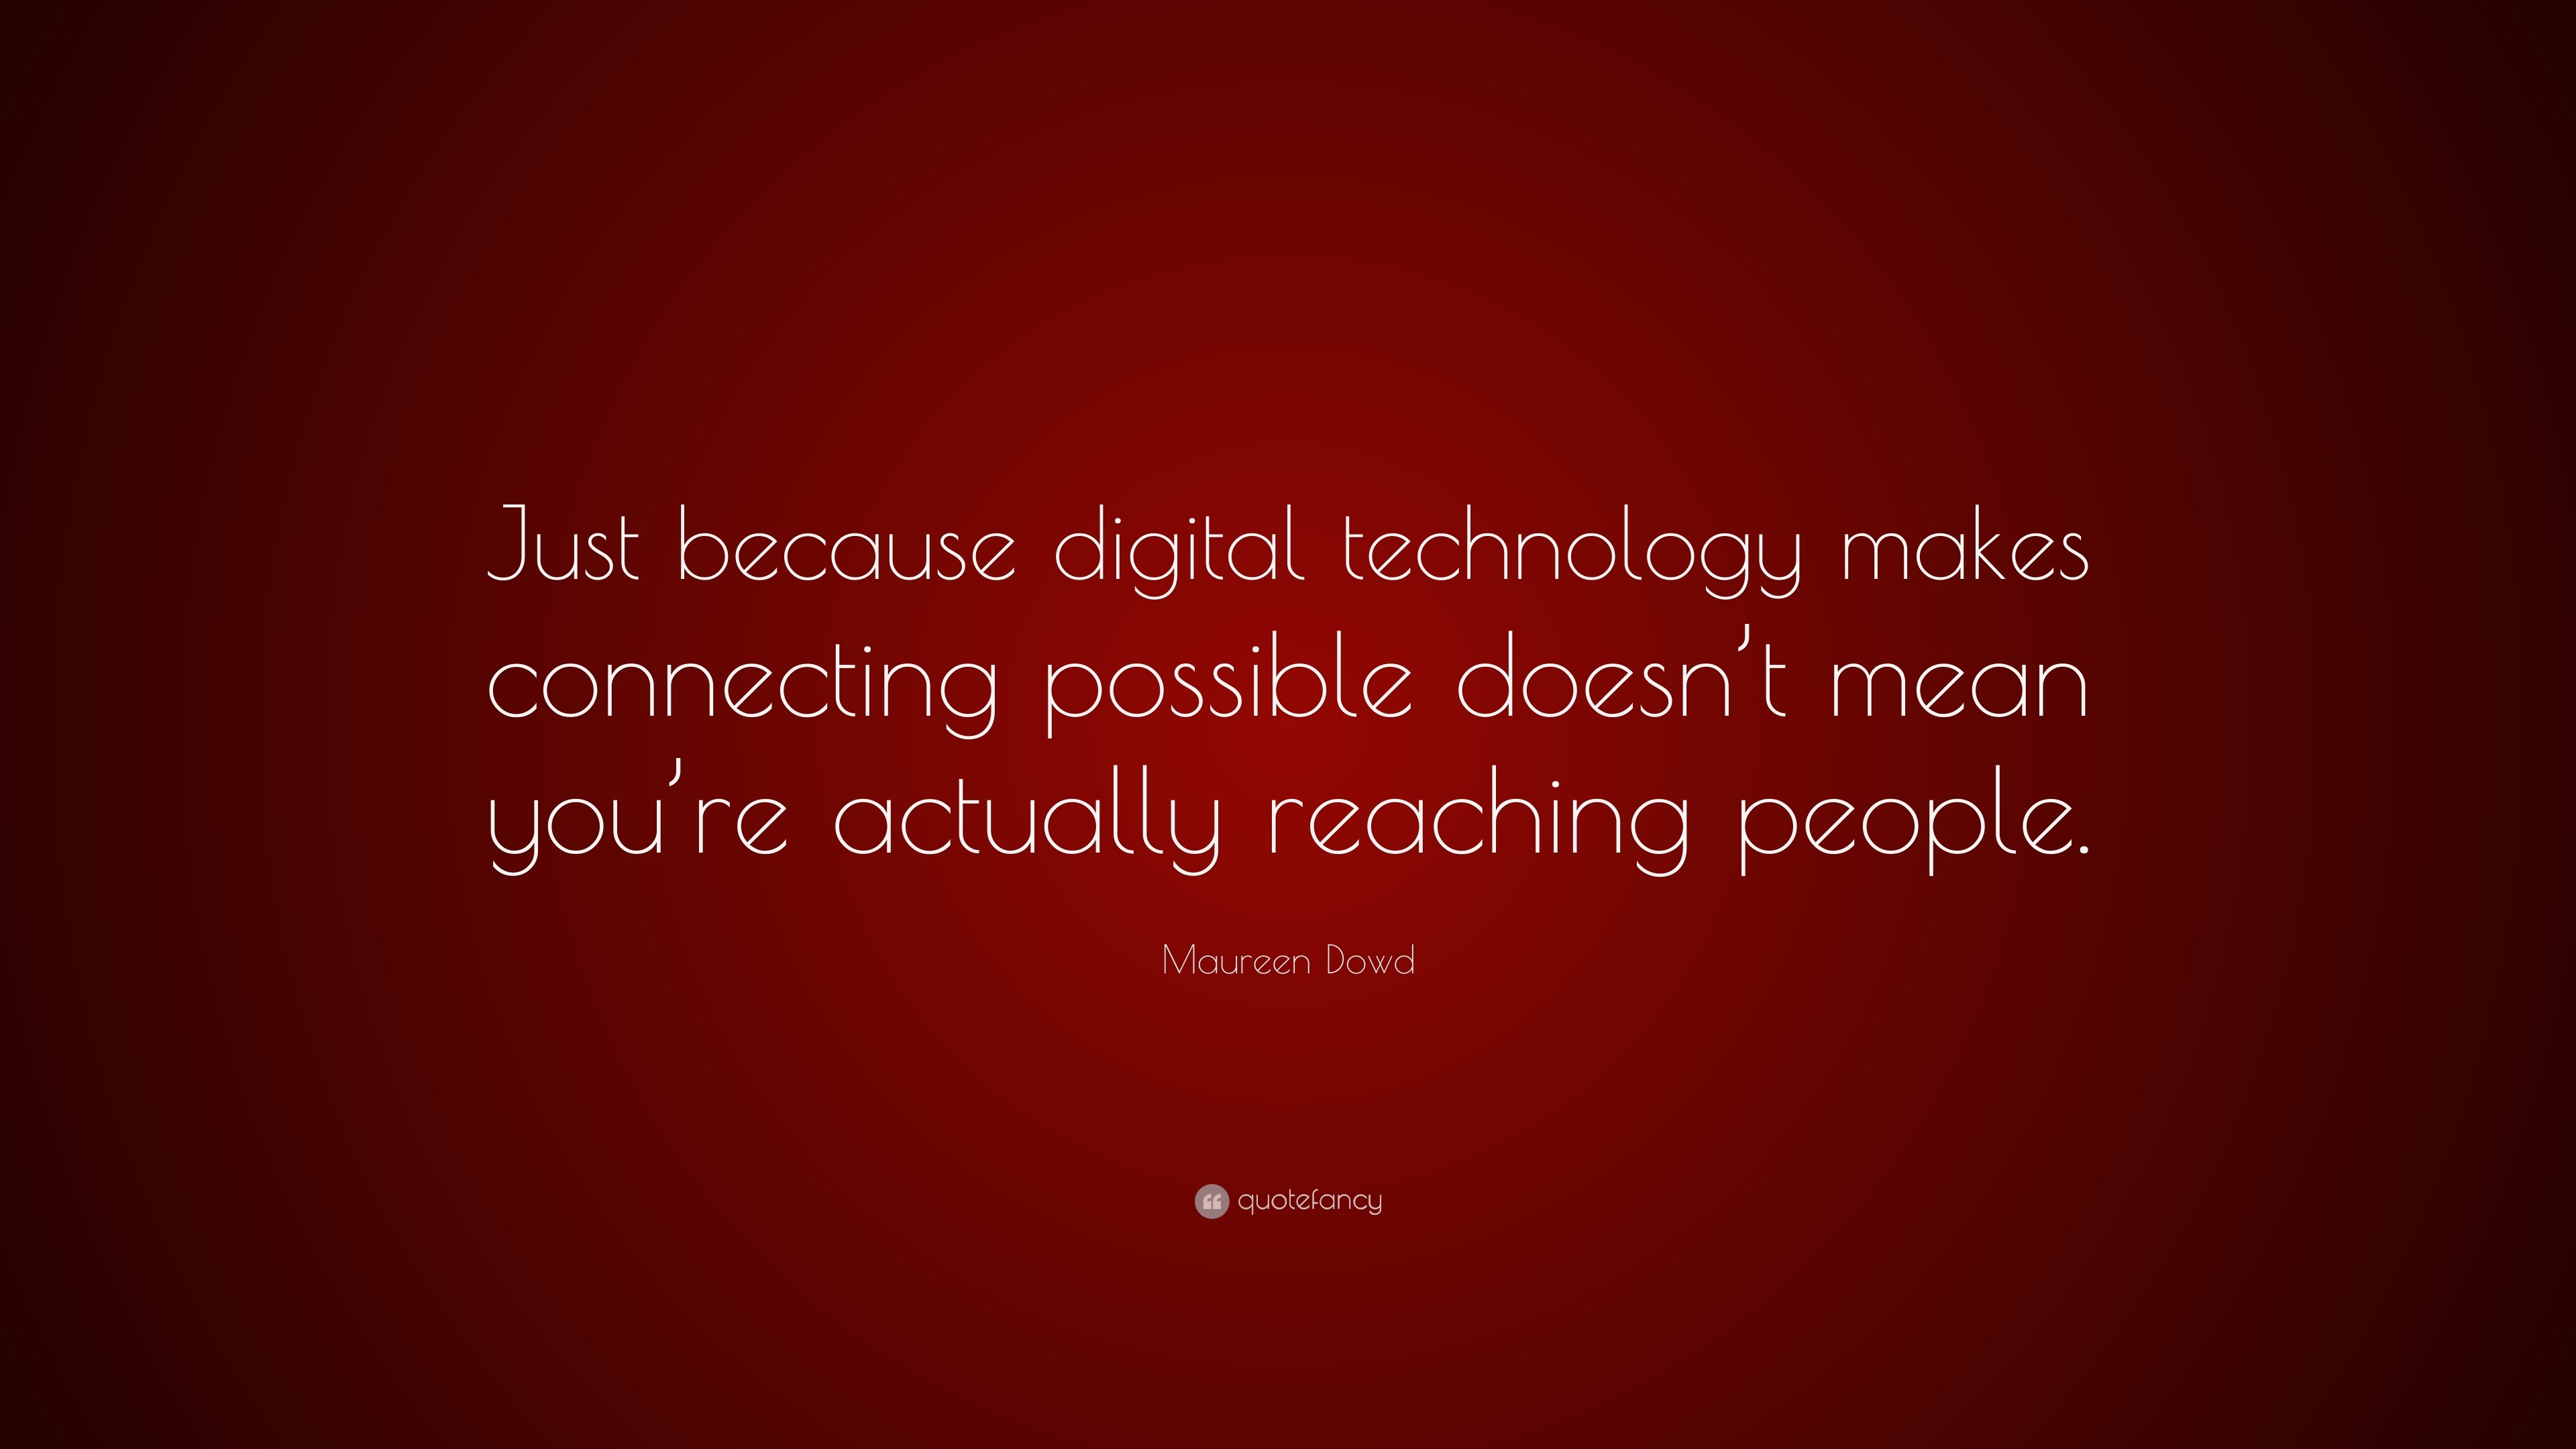 Maureen Dowd Quote: “Just because digital technology makes connecting ...